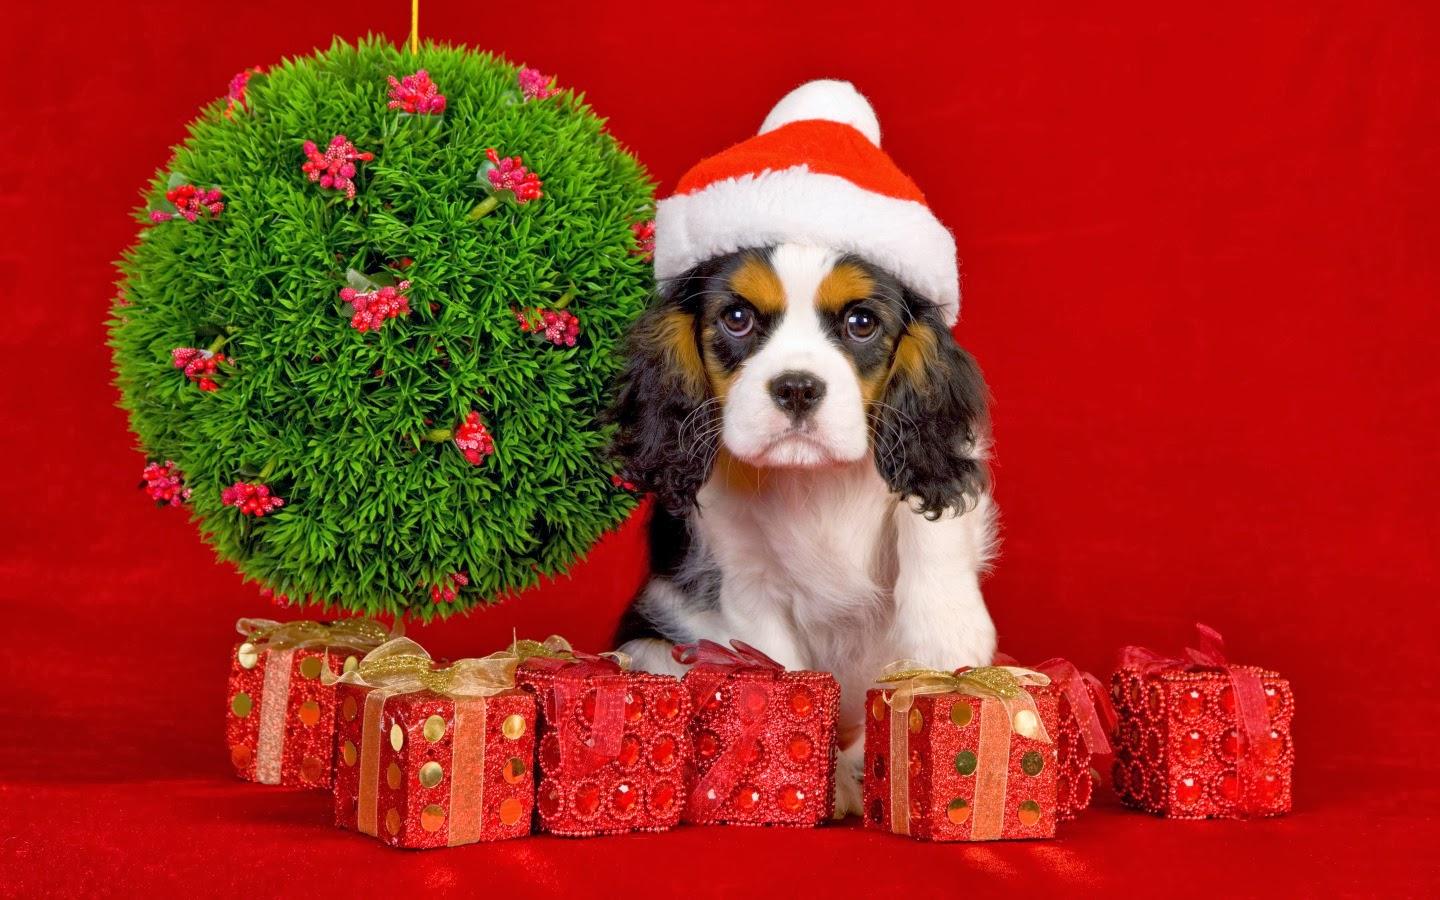 69400 Christmas Dog Stock Photos Pictures  RoyaltyFree Images  iStock   Christmas cat Christmas Dog holiday